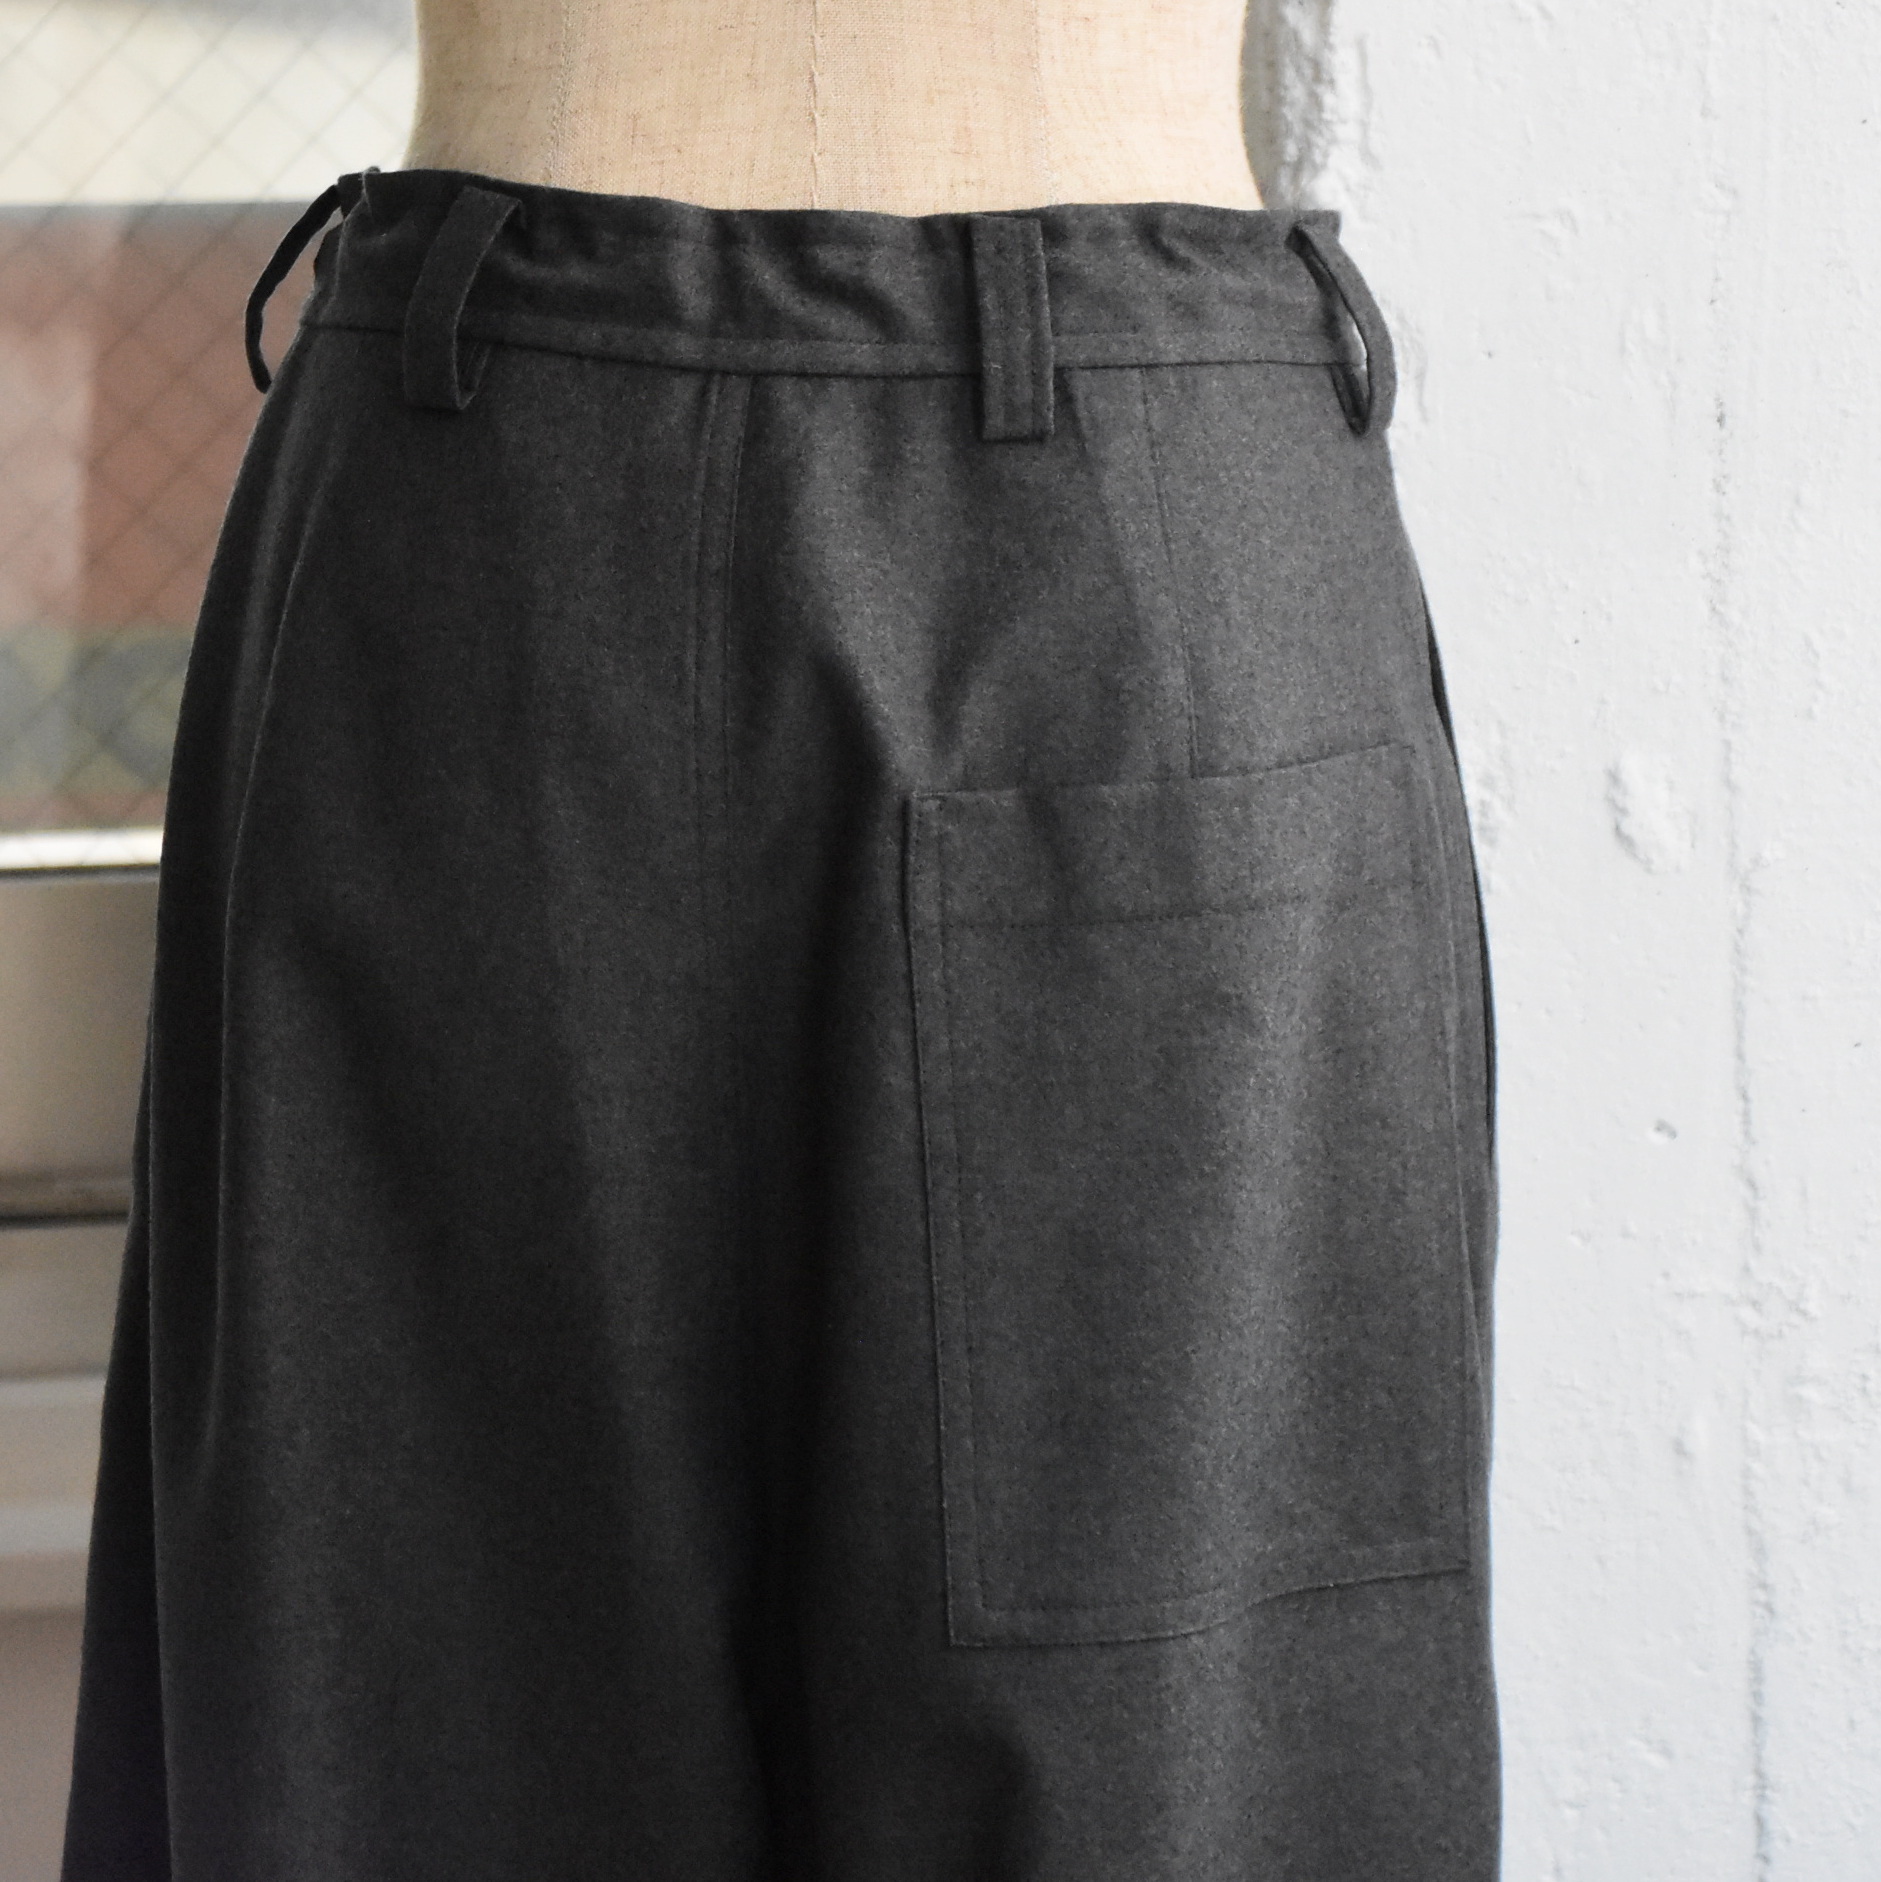 SOFIE D'HOORE(ソフィードール) / Low crotch pants with zip and drawstring【2色展開】(8)